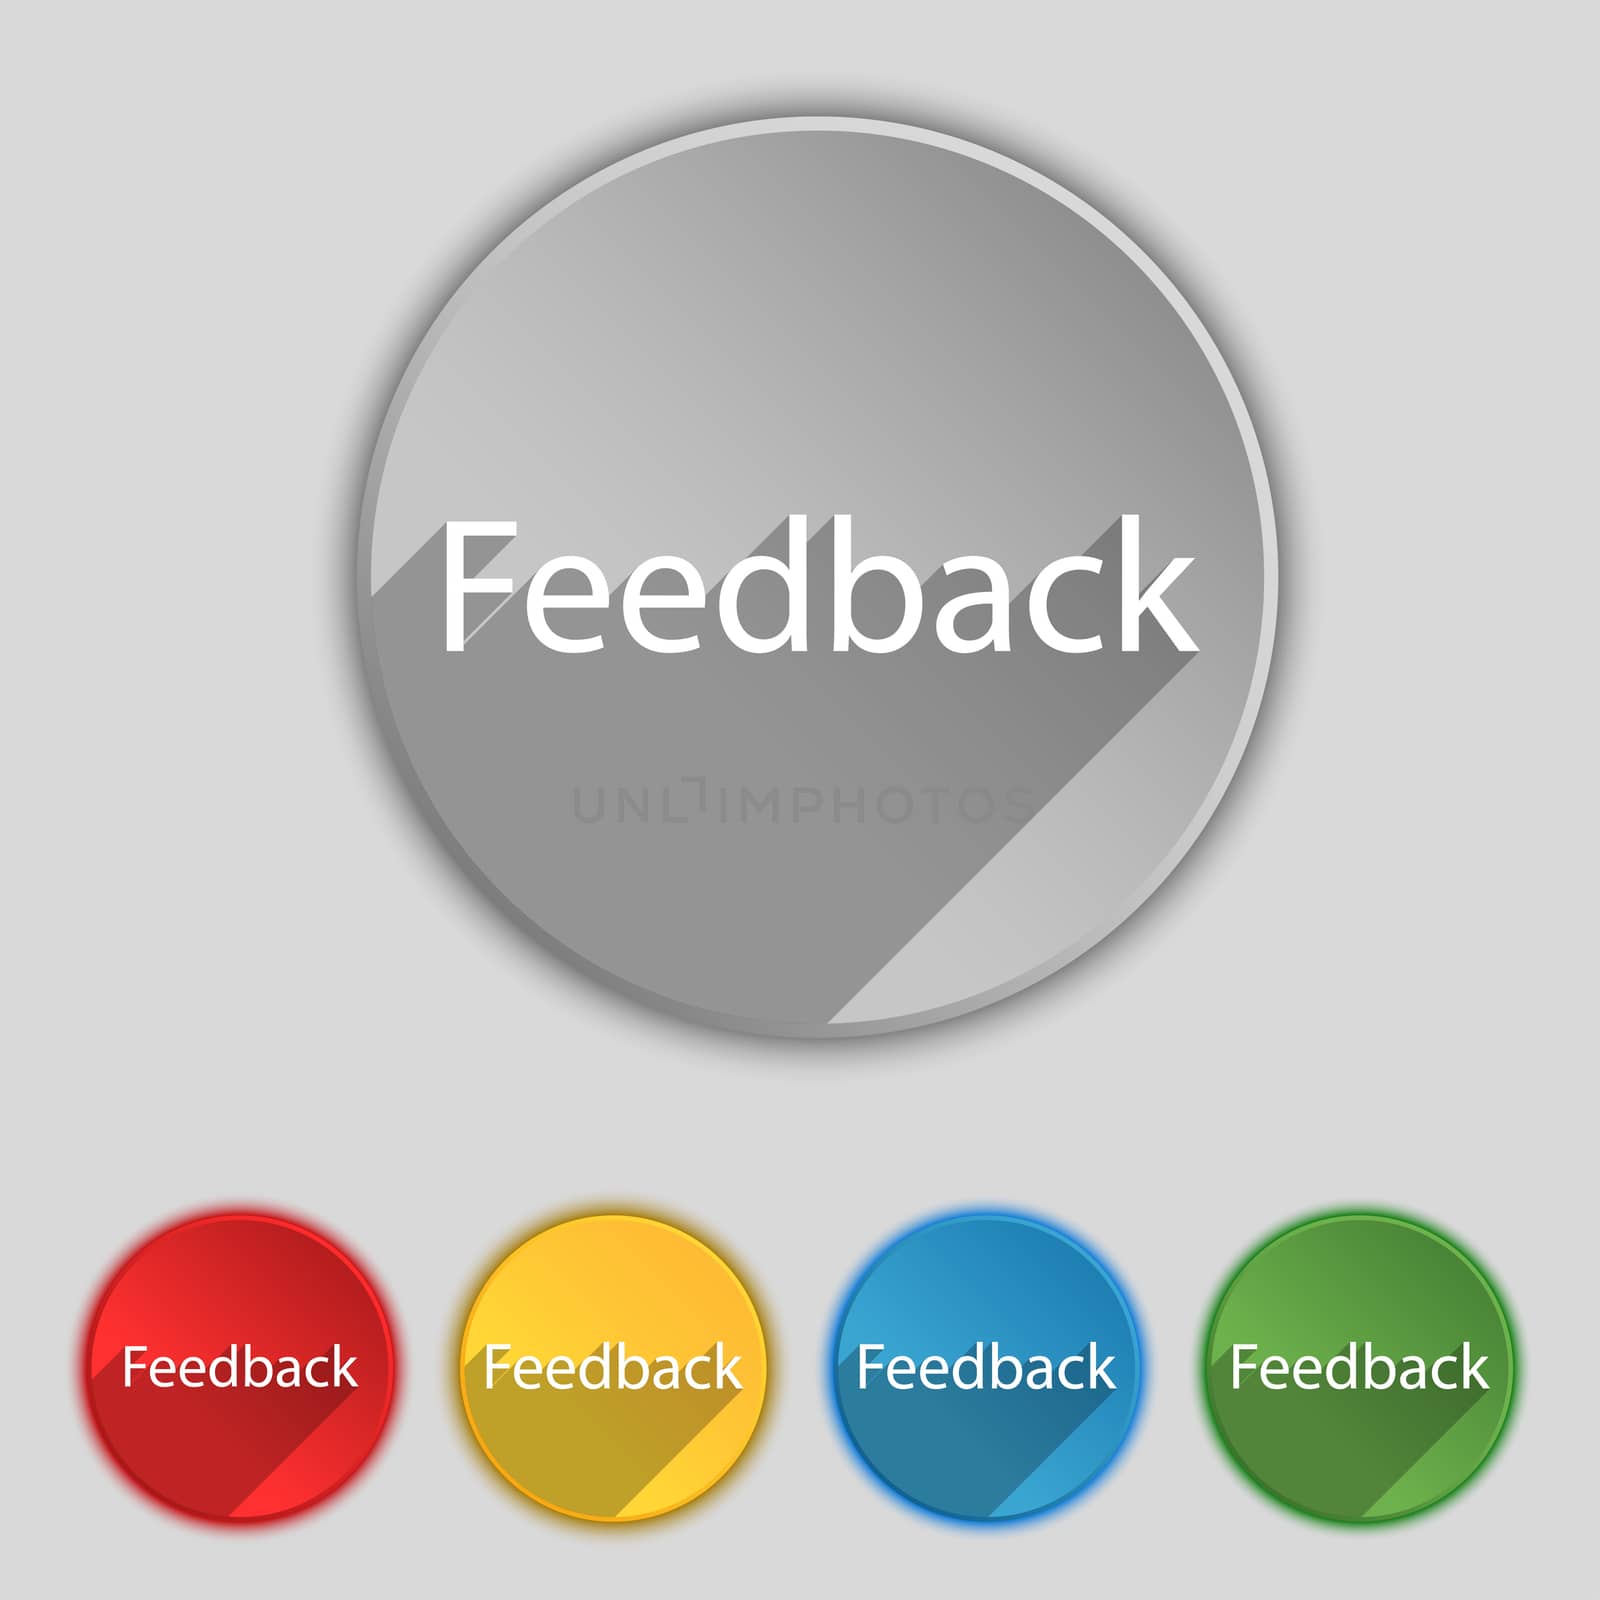 Feedback sign icon. Set of colored buttons. illustration